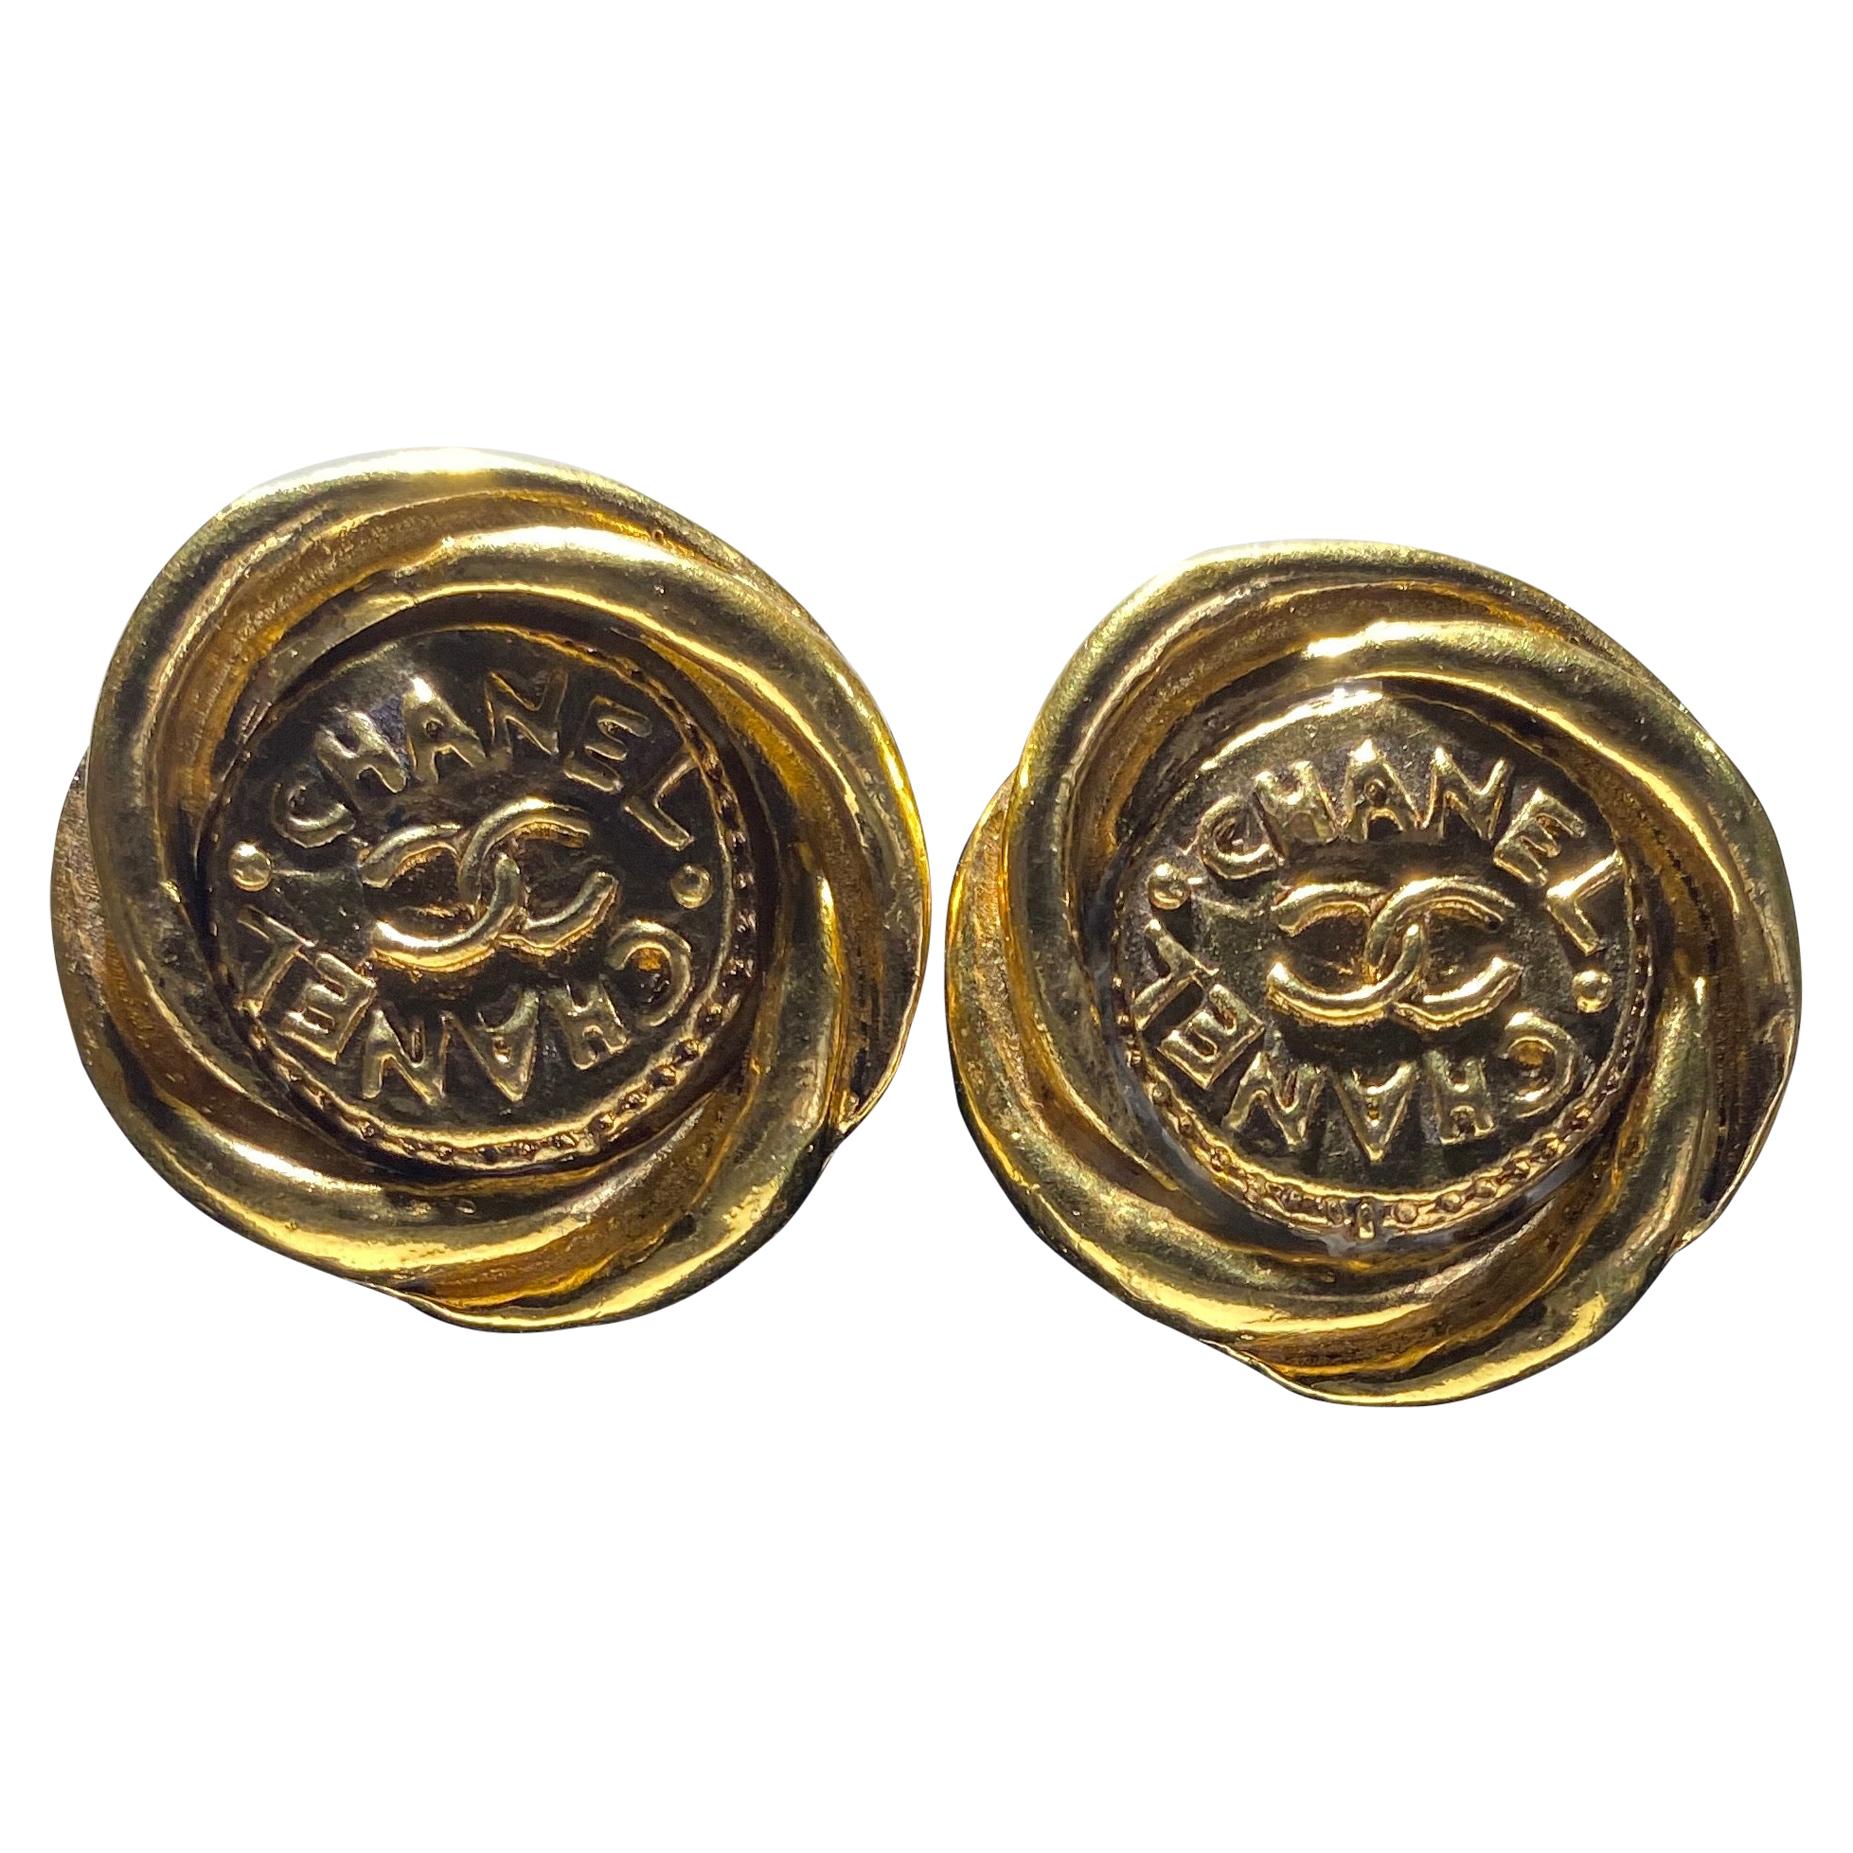 One Pair Of Chanel Button Earrings, Great Bold Scale.